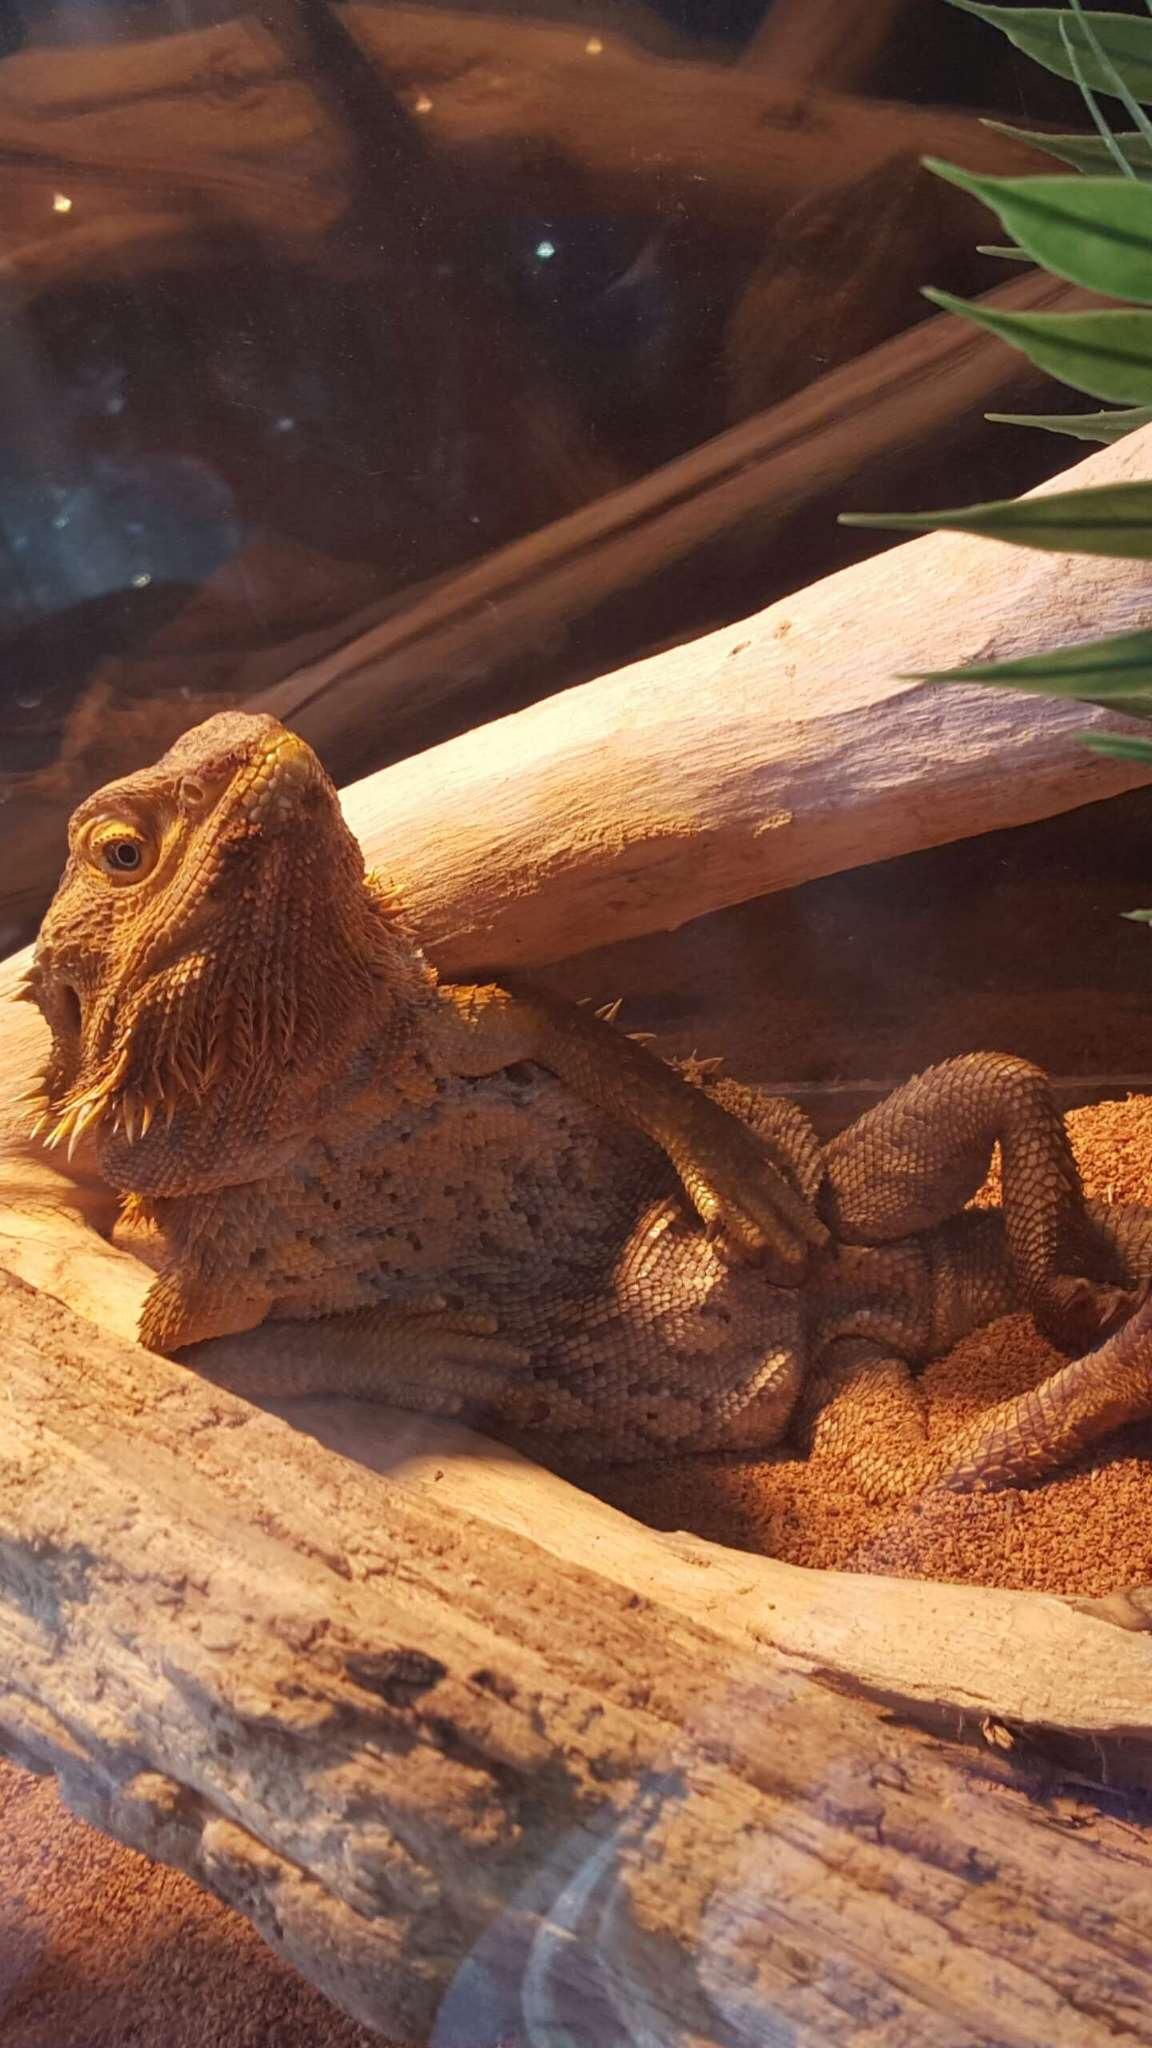 Woke up to my lizard looking at me like this...